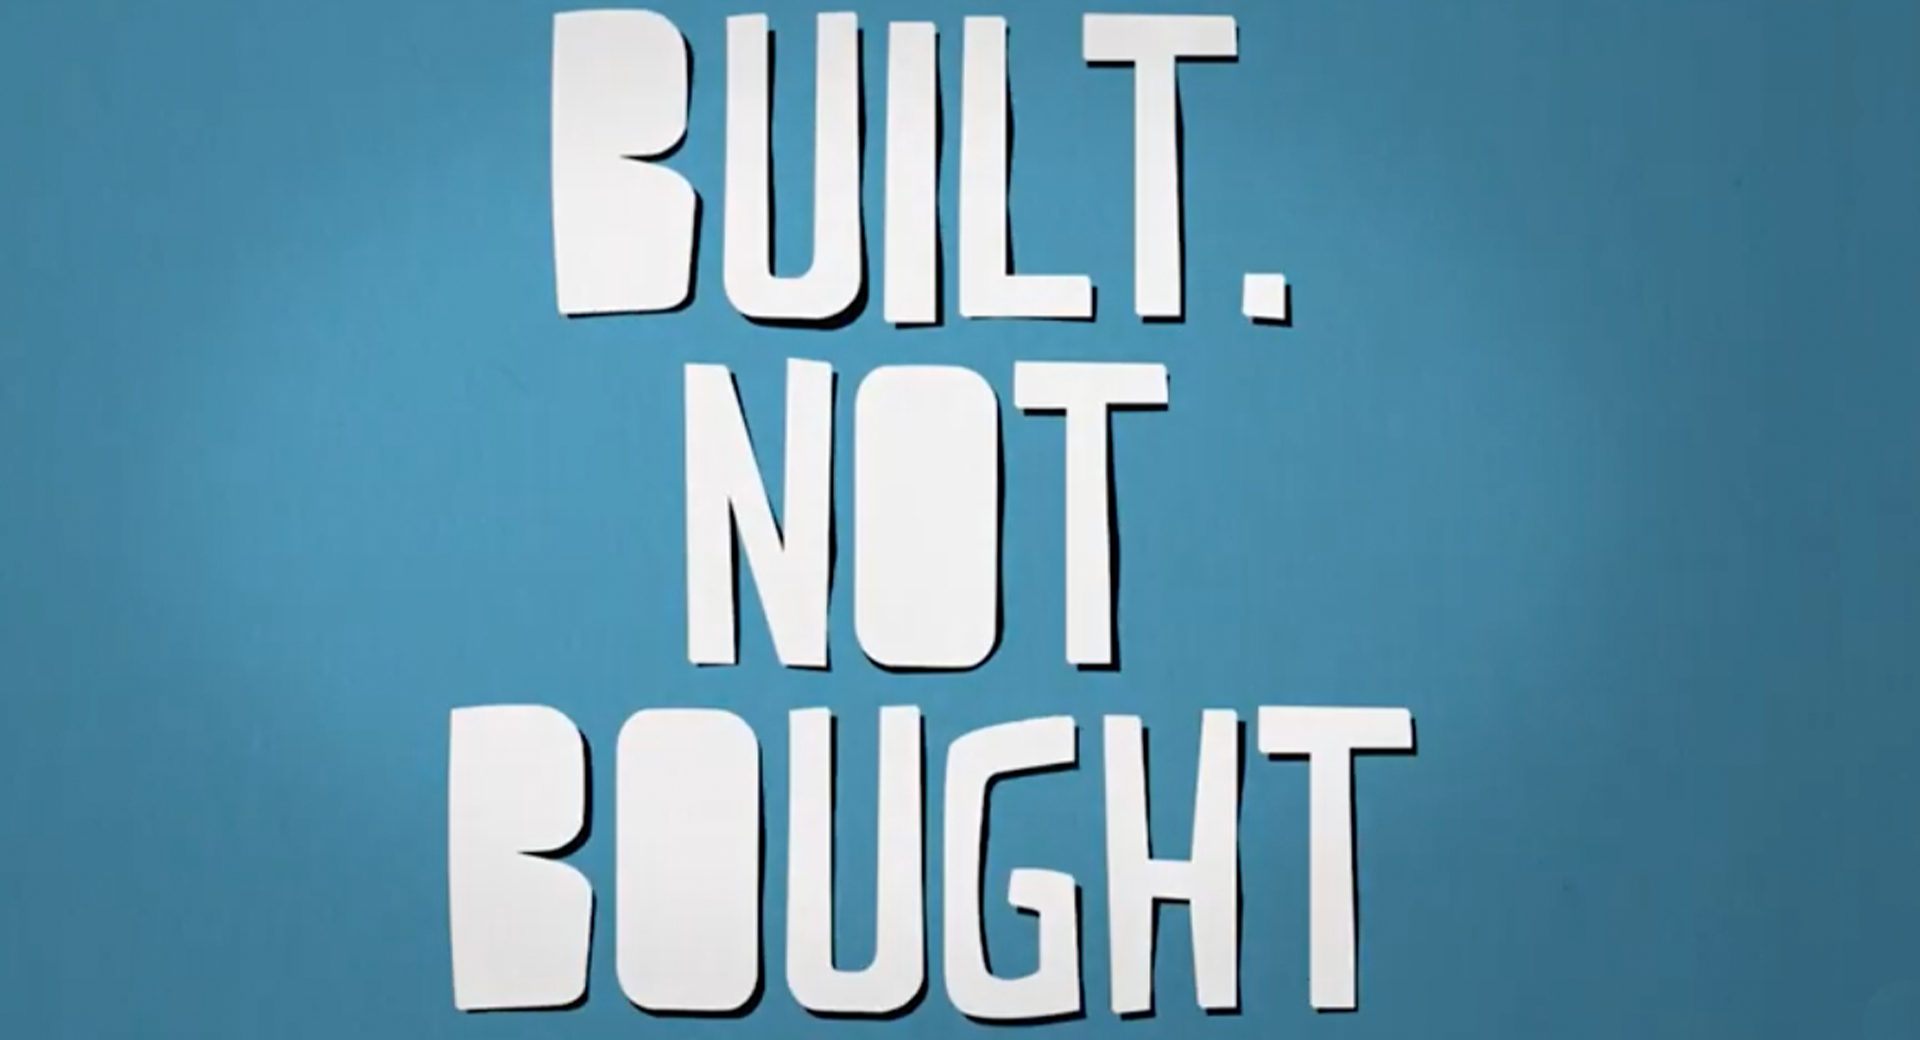 Built Not Bought: The Skyward Difference 